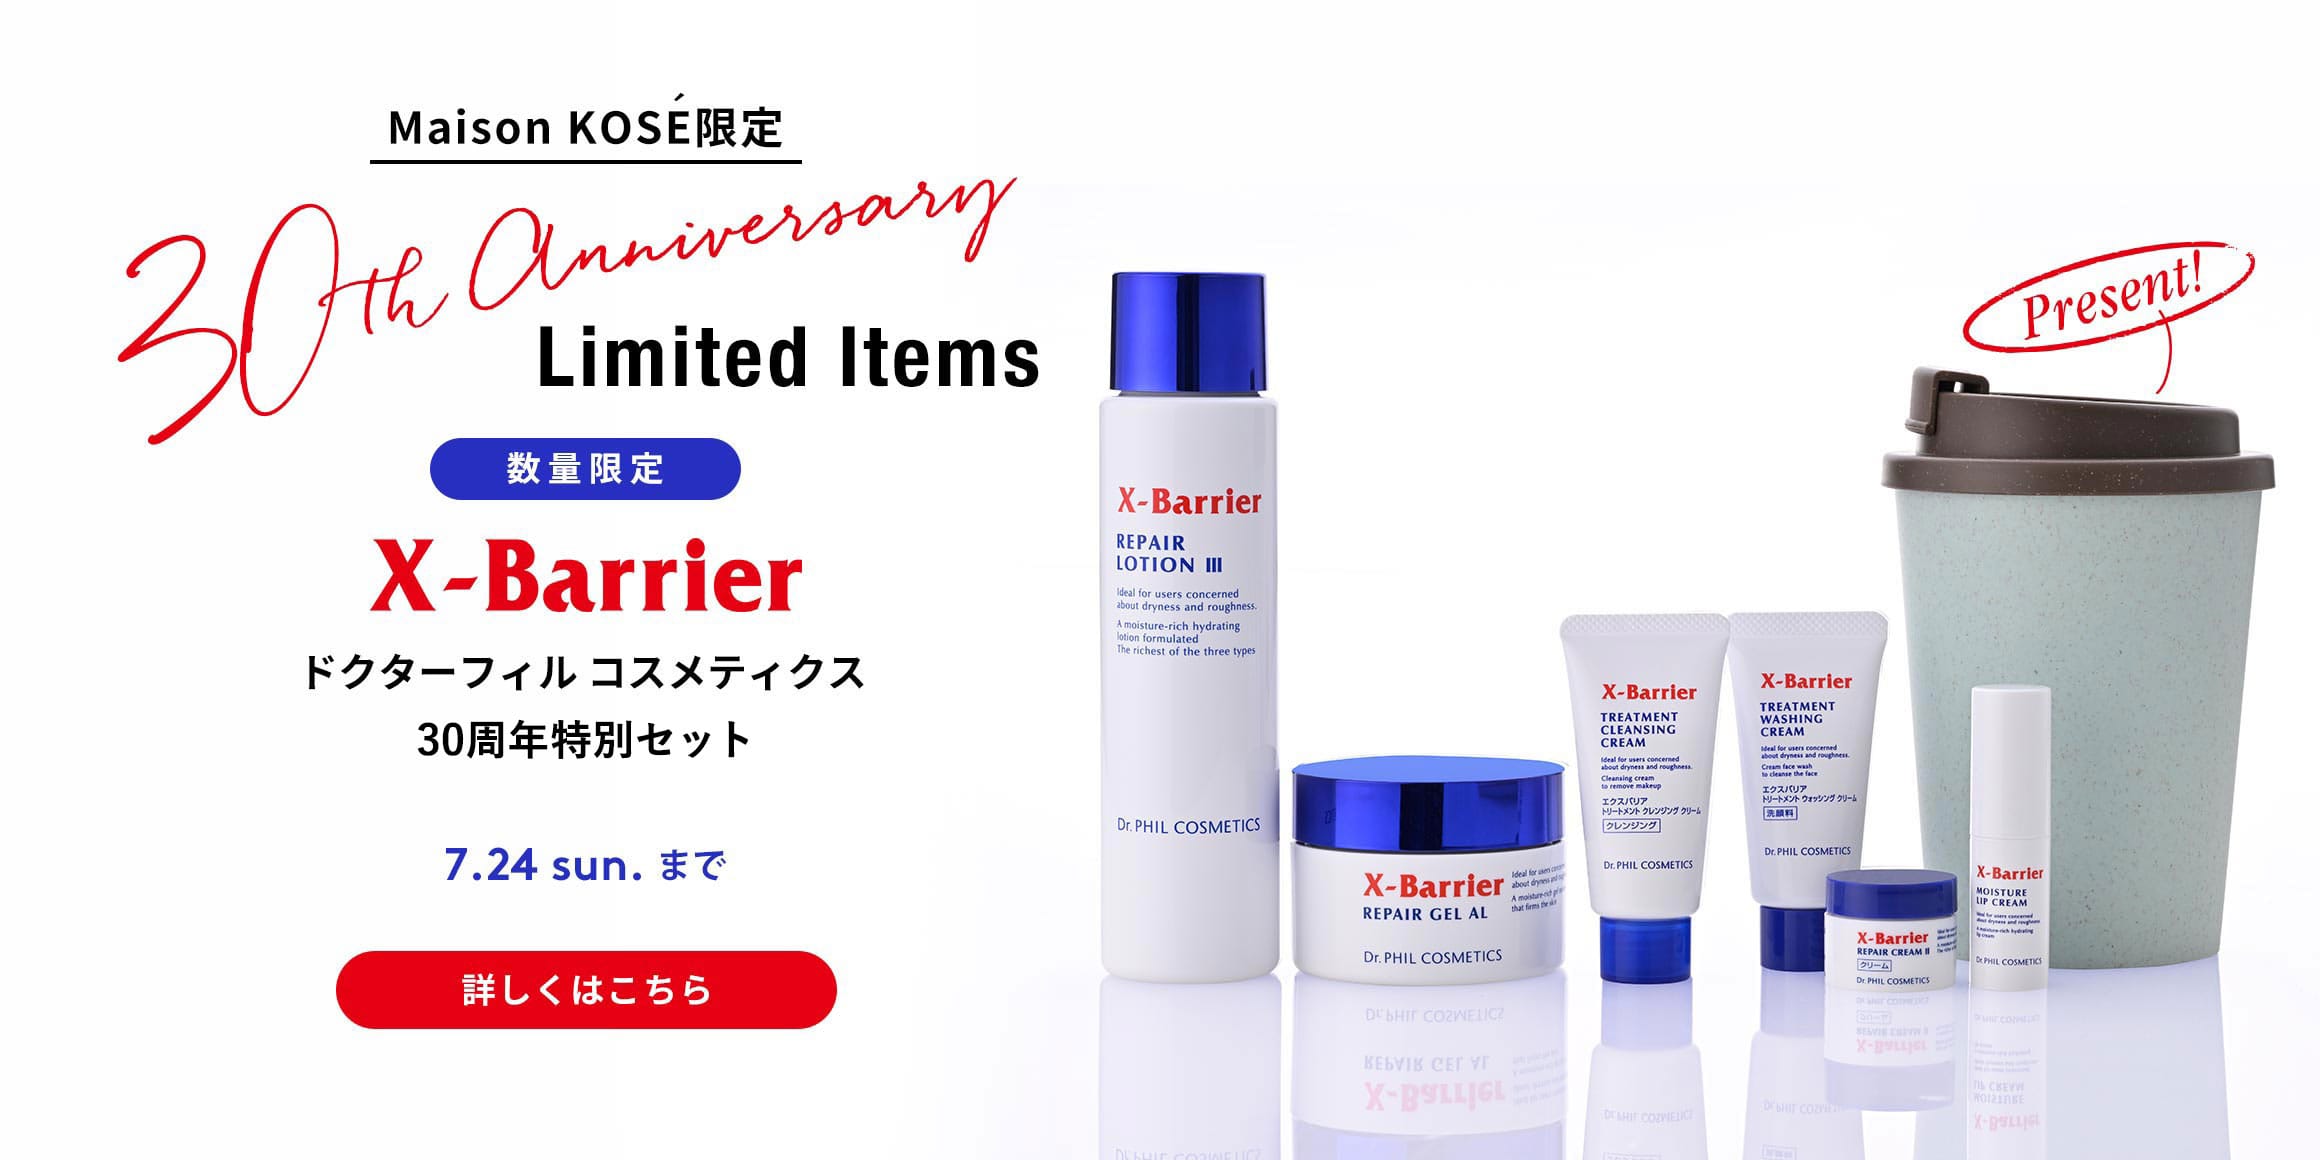 30th Anniverssary Limited Items X-Barrier ドクターフィル コスメティクス 30周年特別セット